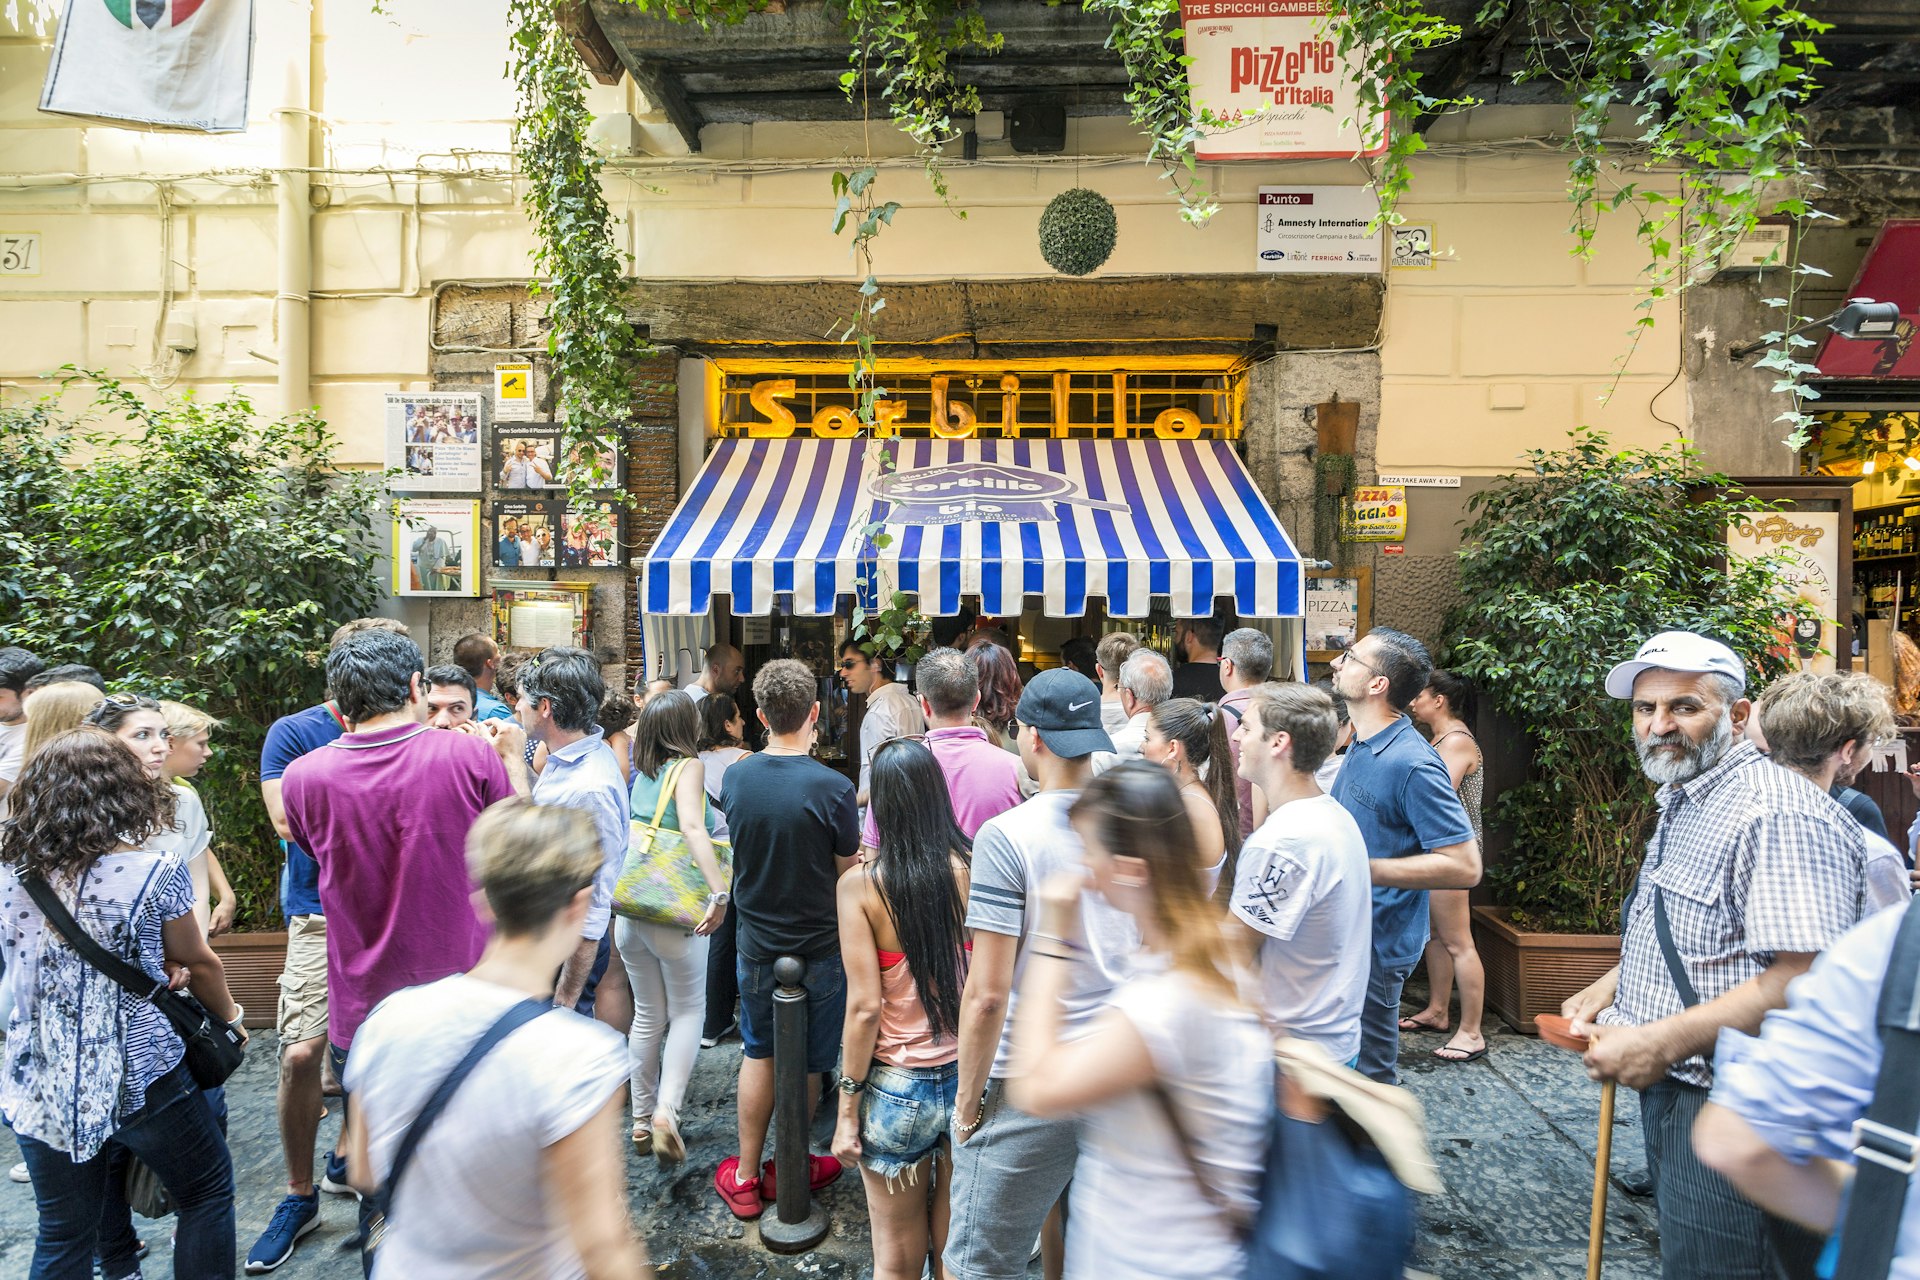  A crowd forms in front of the blue awning of Gino Sorbillo Pizzeria in Naples